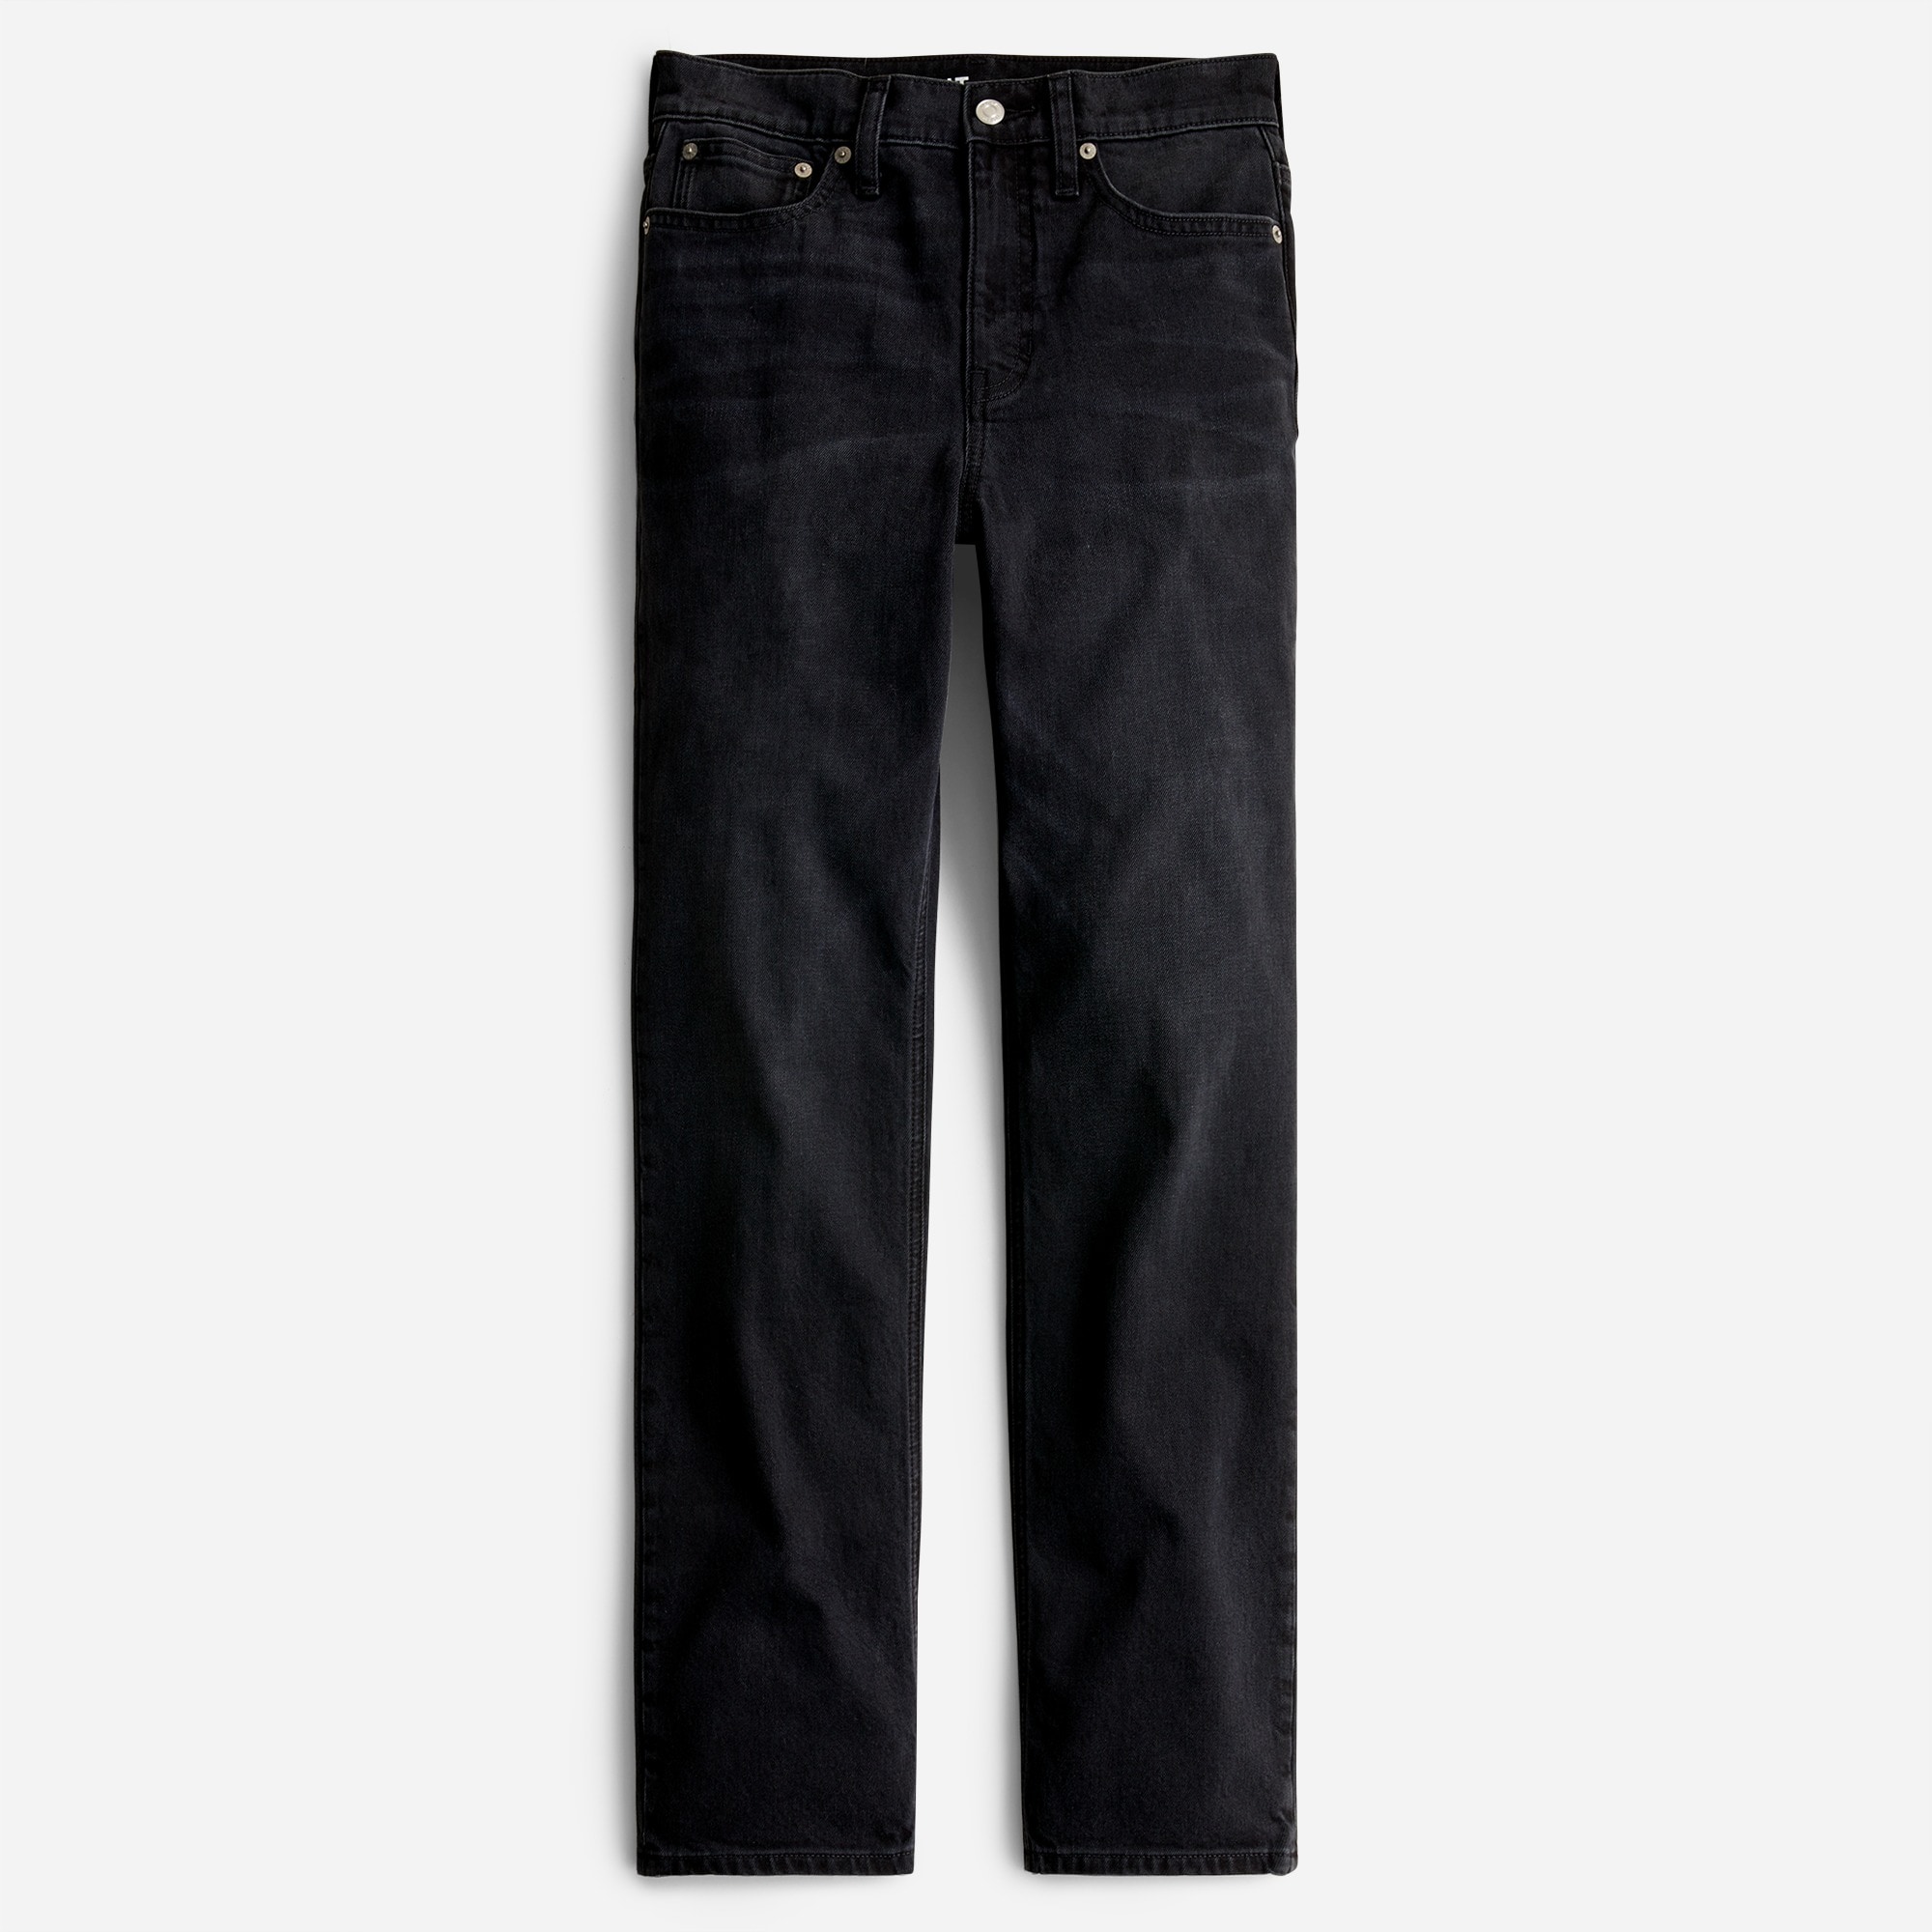 J.Crew: High-rise '90s Classic Straight Jean In Charcoal Wash For Women